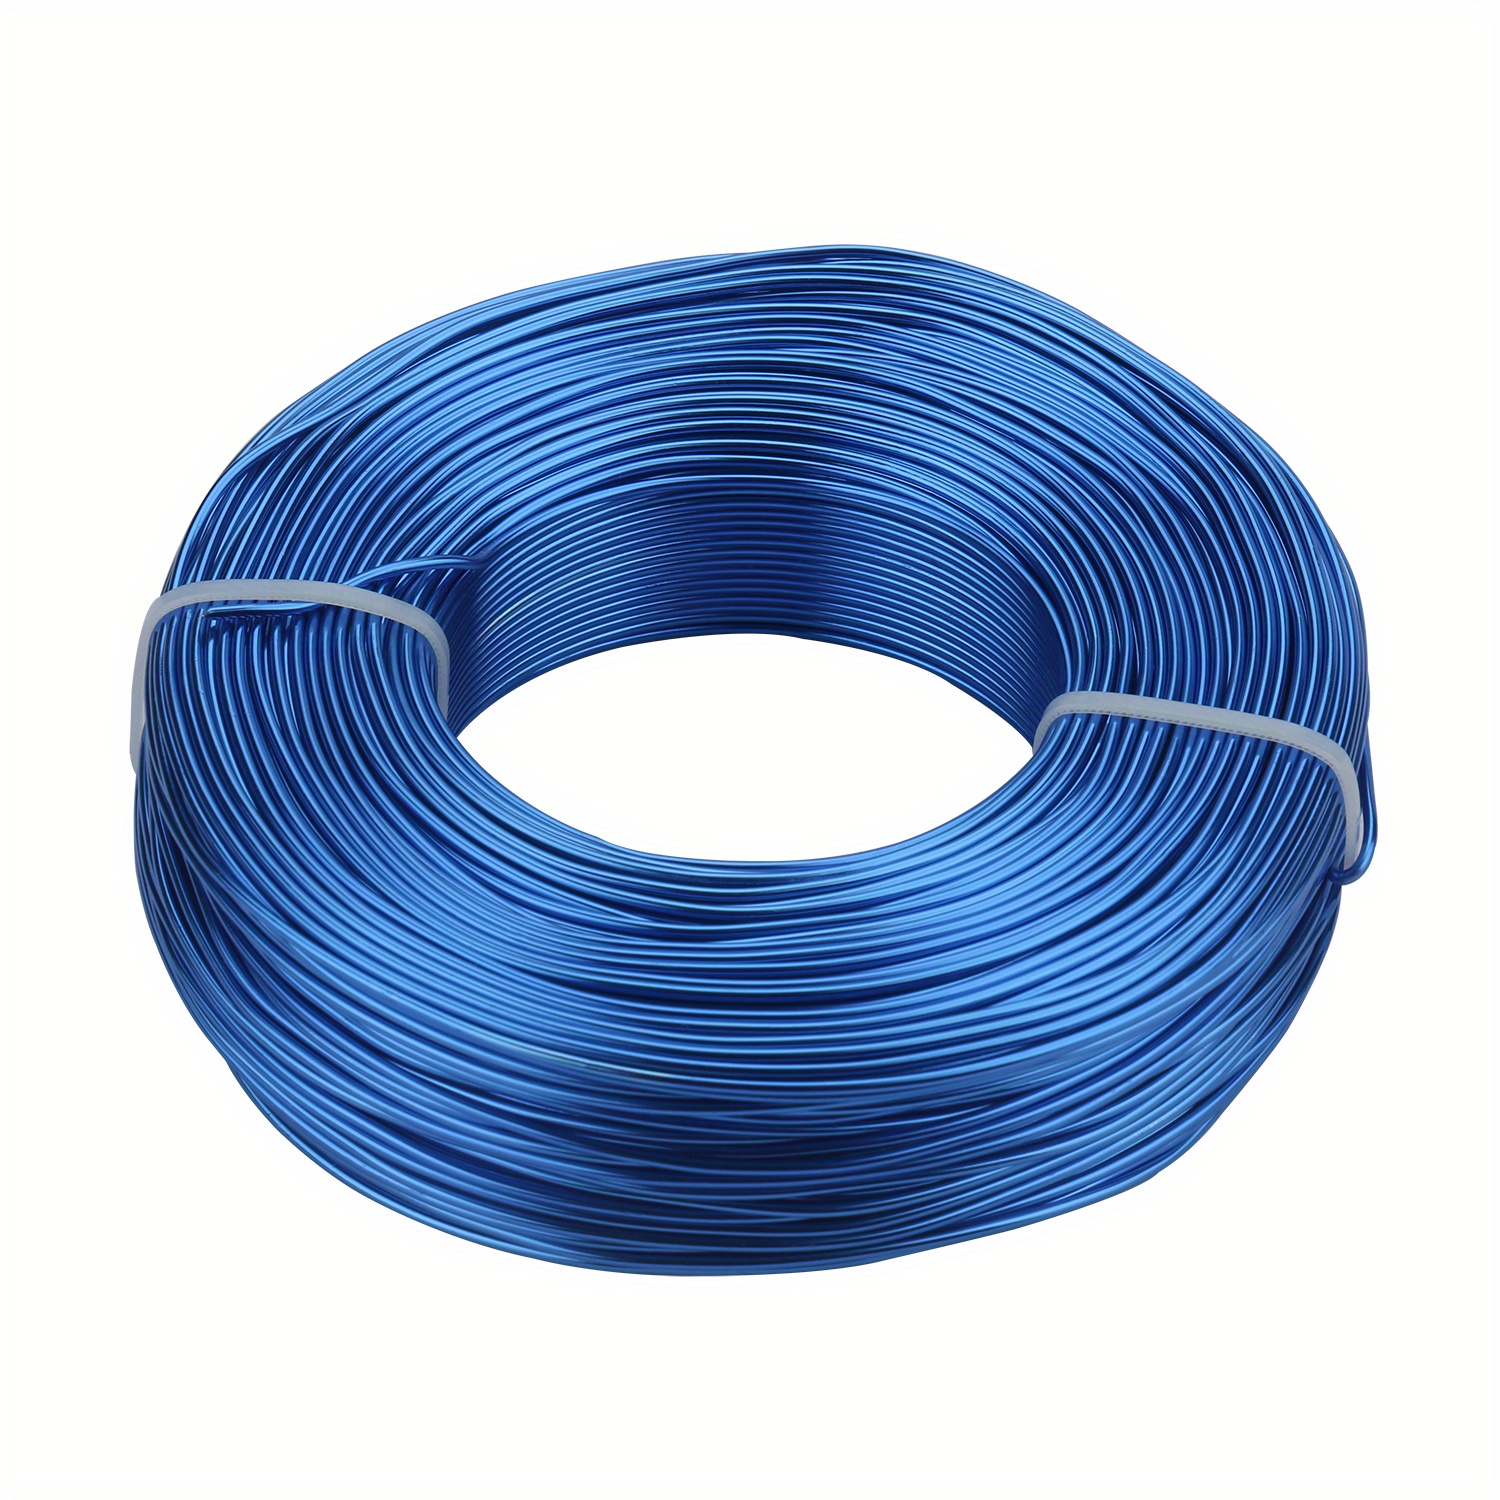 46-170-10-14 Aluminum Craft & Jewelry Wire, 1mm, 12 meter - Silver Color -  Rings & Things